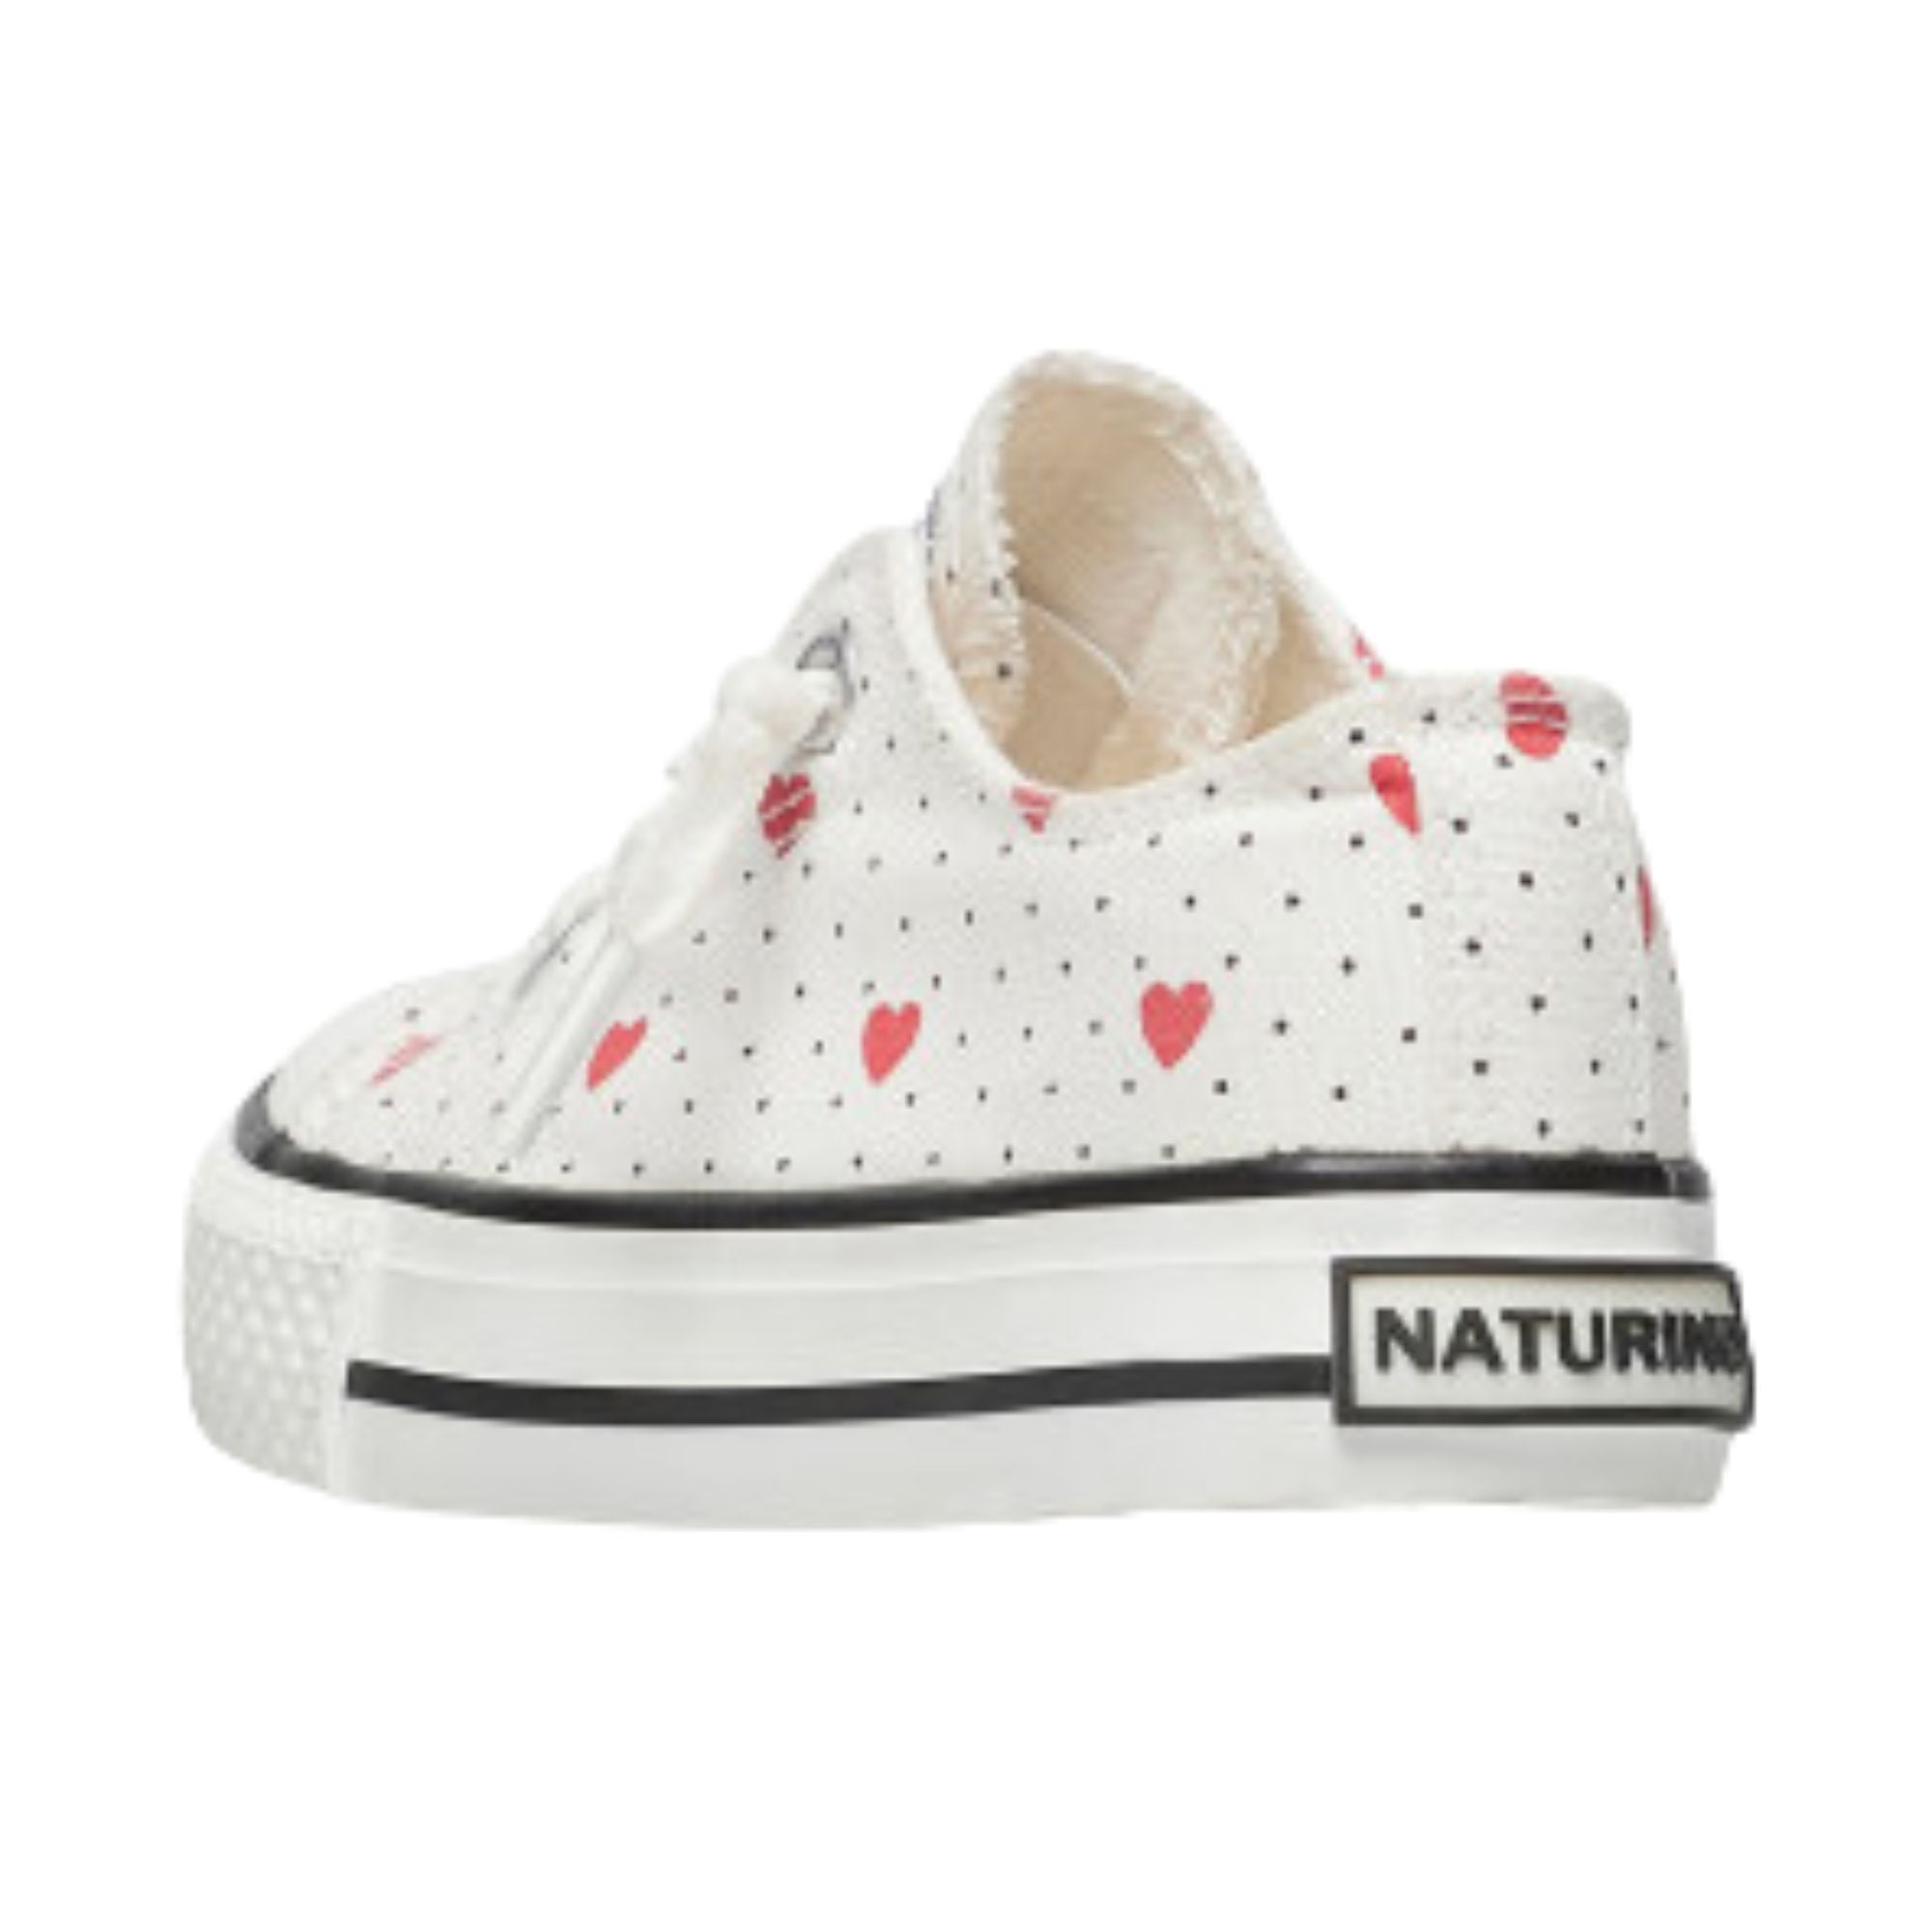 Naturino Baby Girls Delave Lovely White Sneakers